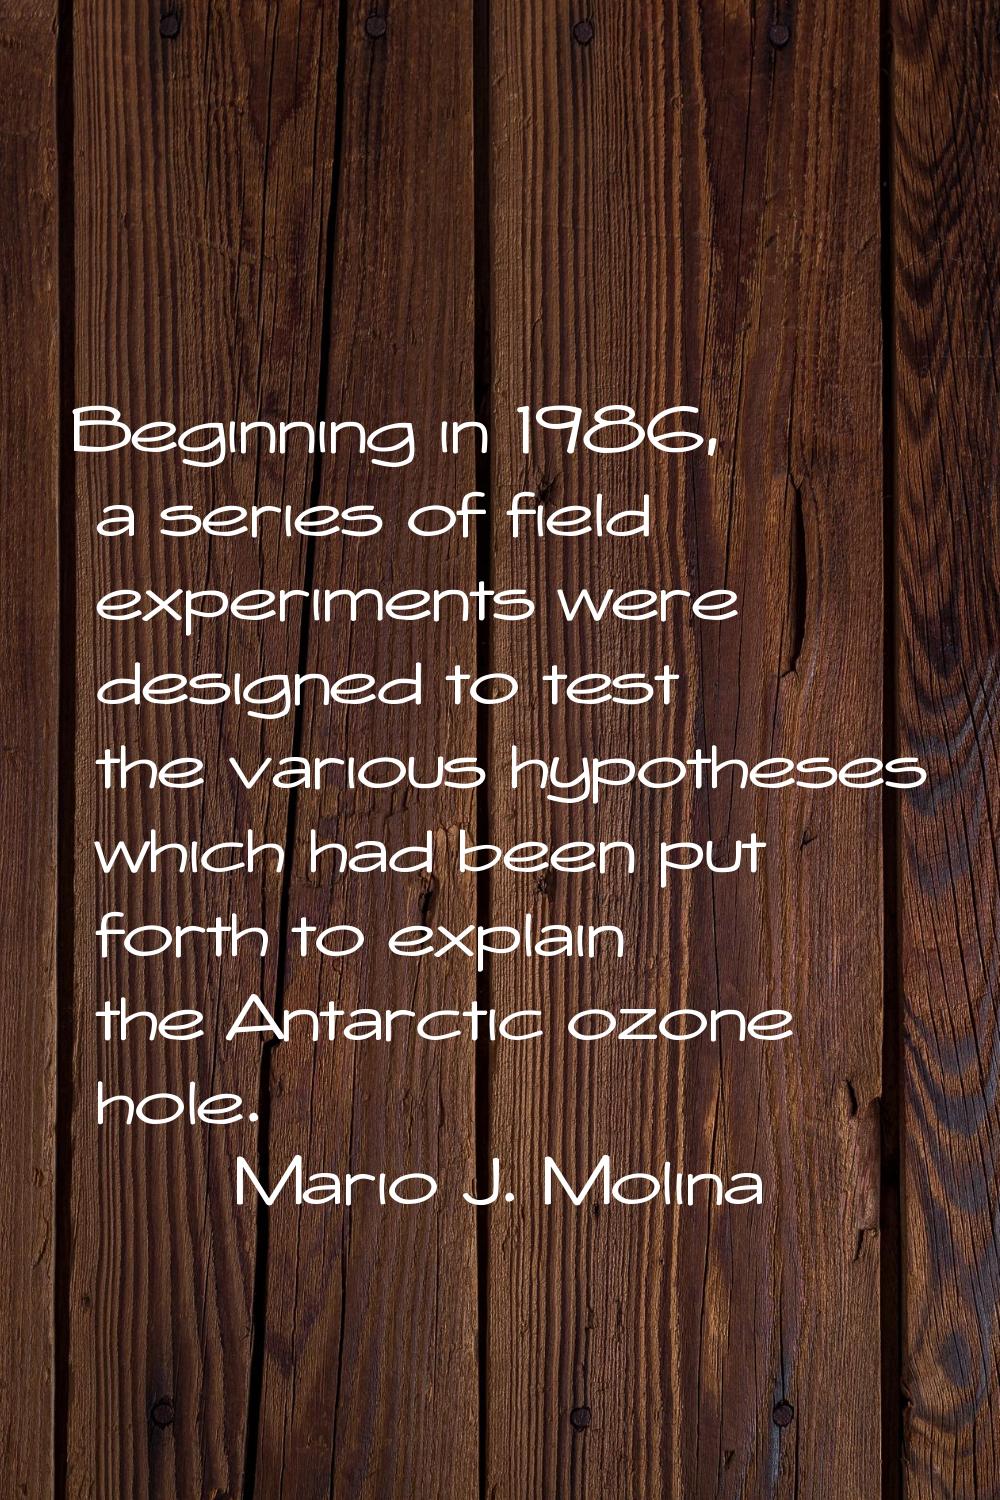 Beginning in 1986, a series of field experiments were designed to test the various hypotheses which